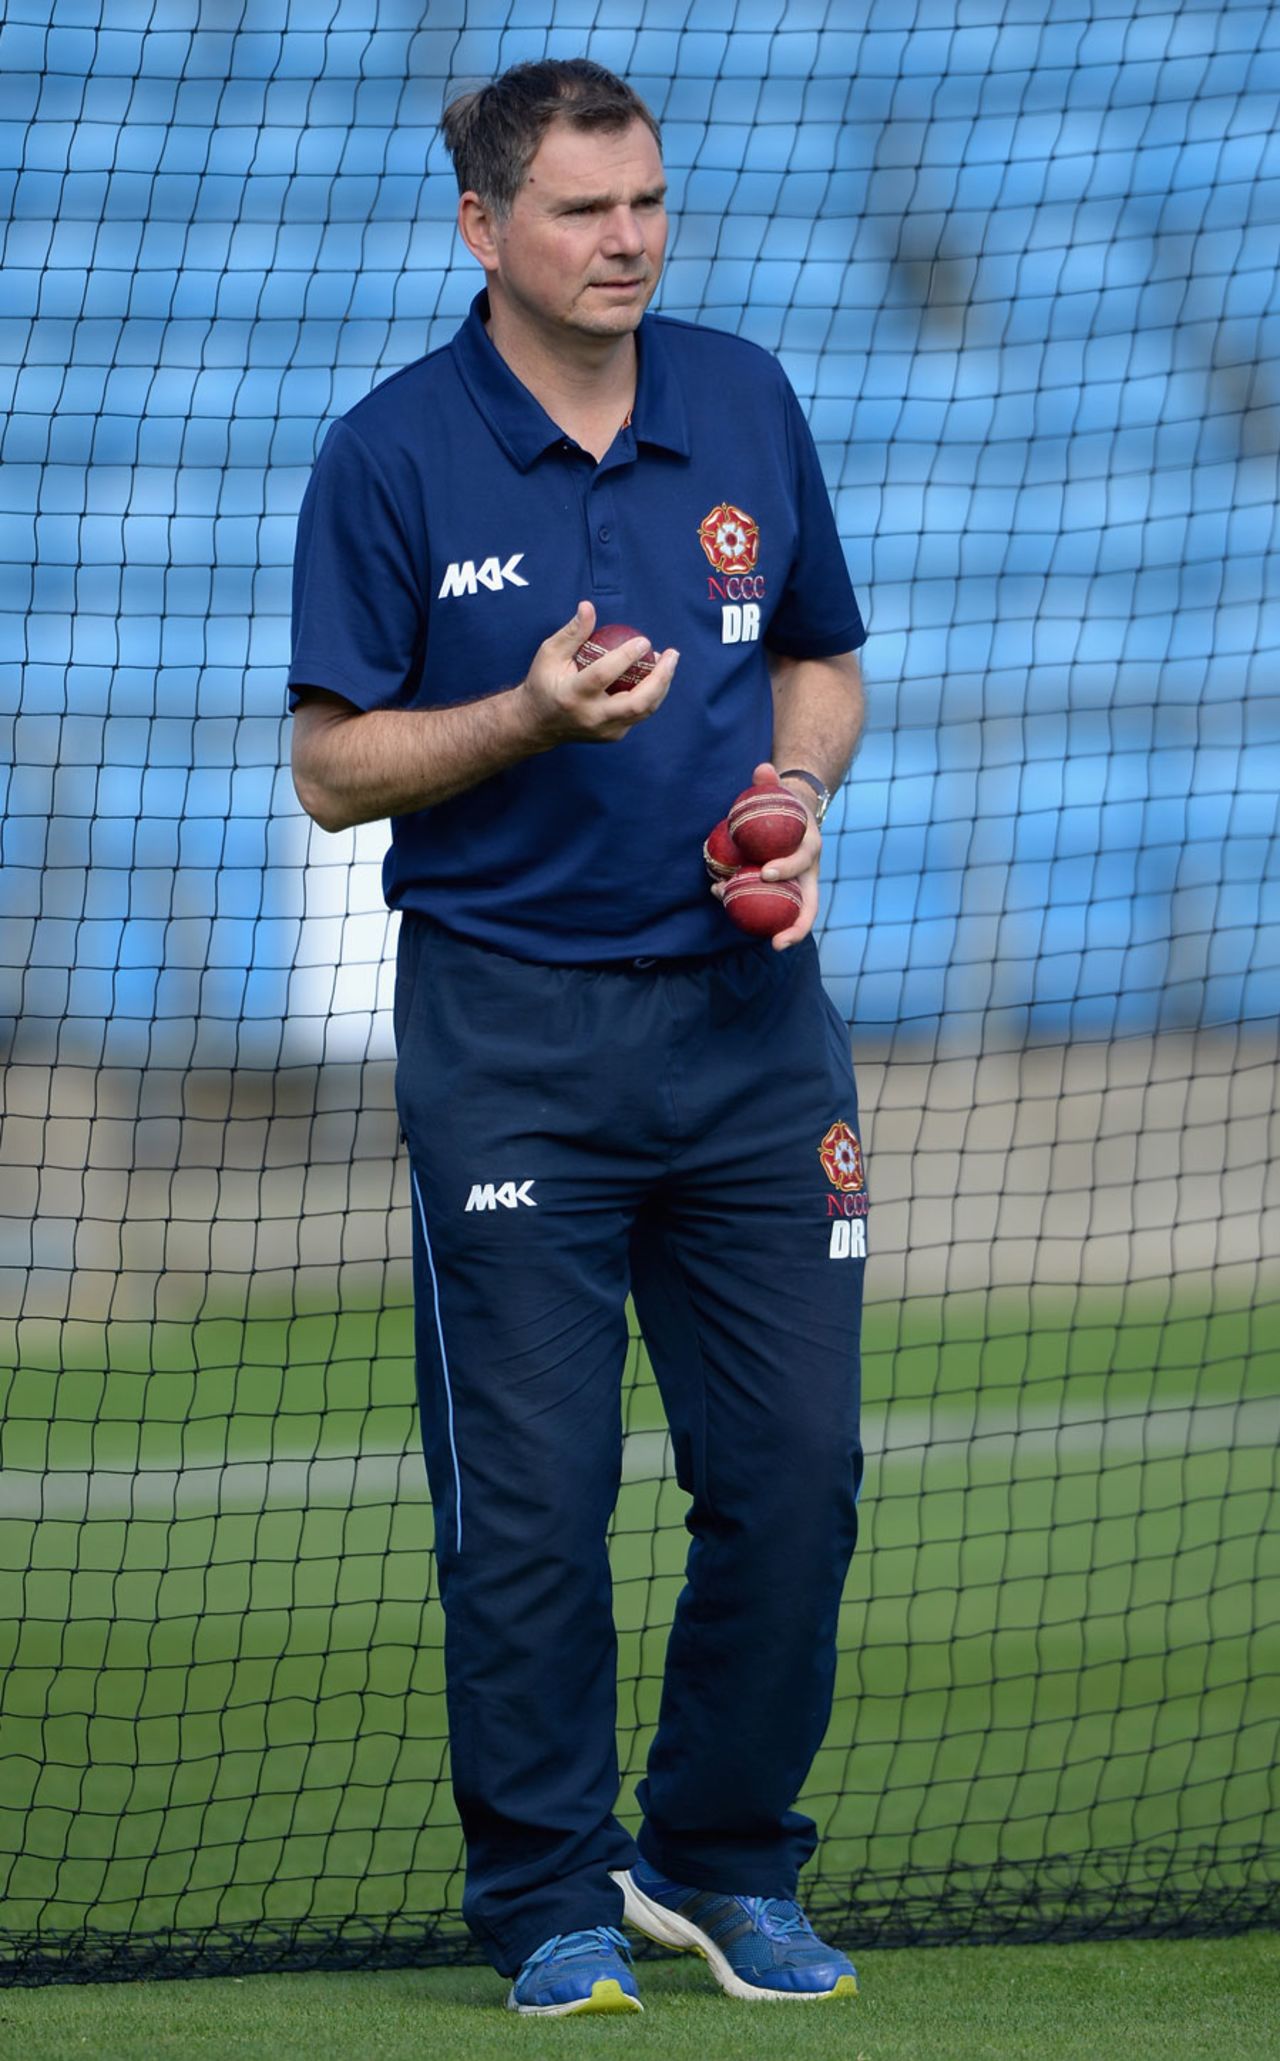 David Ripley leads a fielding drill, Yorkshire v Northamptonshire, County Championship, Division One, Headingley, 4th day, April 23, 2014